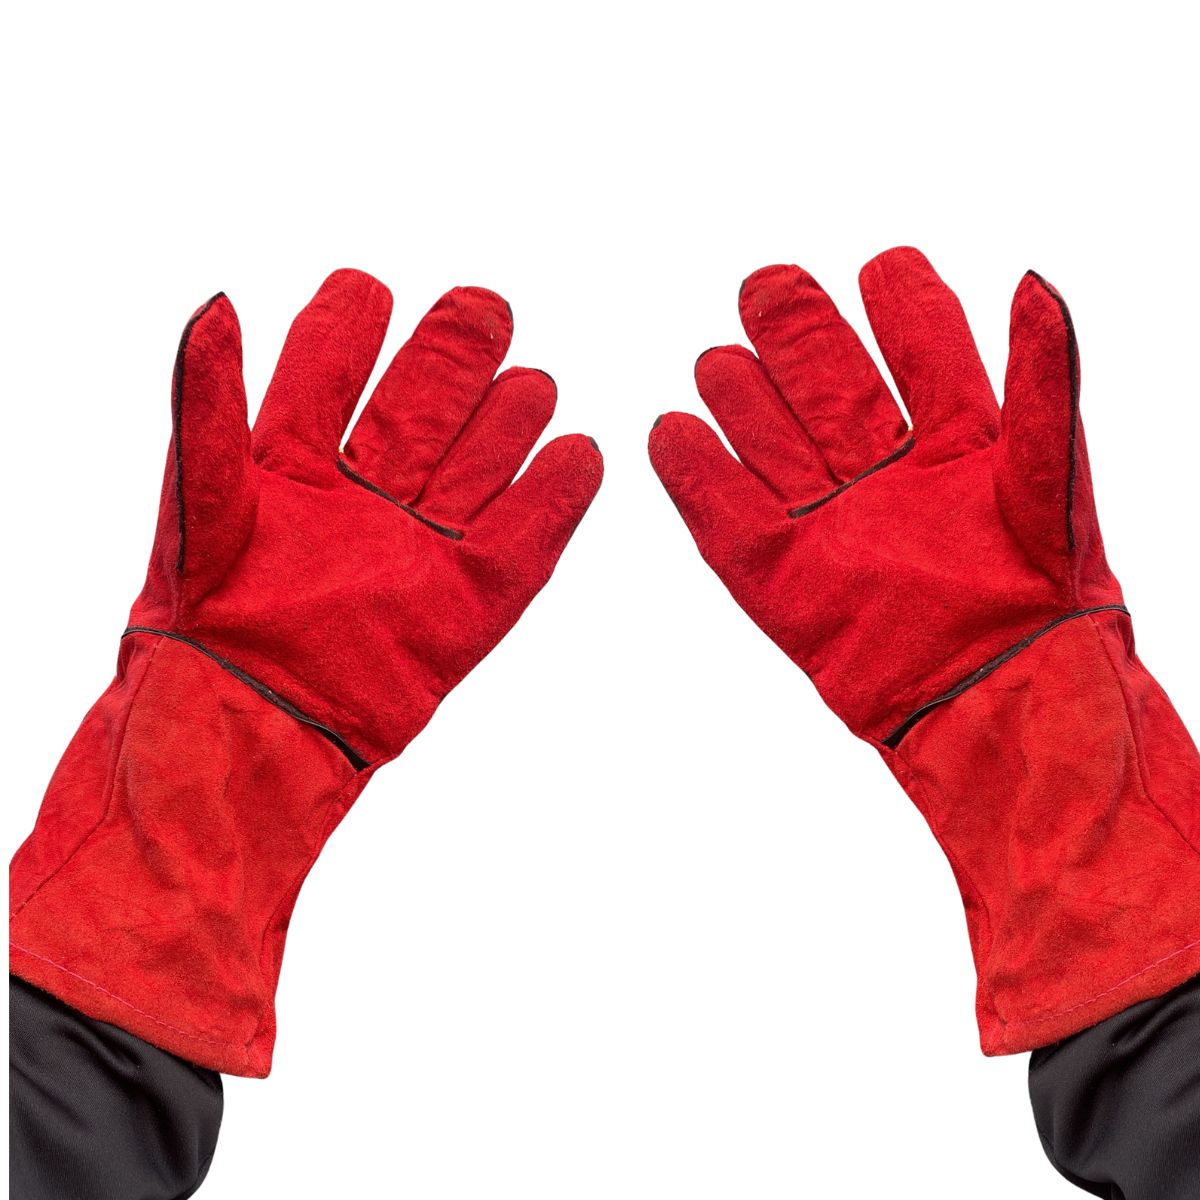 13" Welding Gloves - South East Clearance Centre